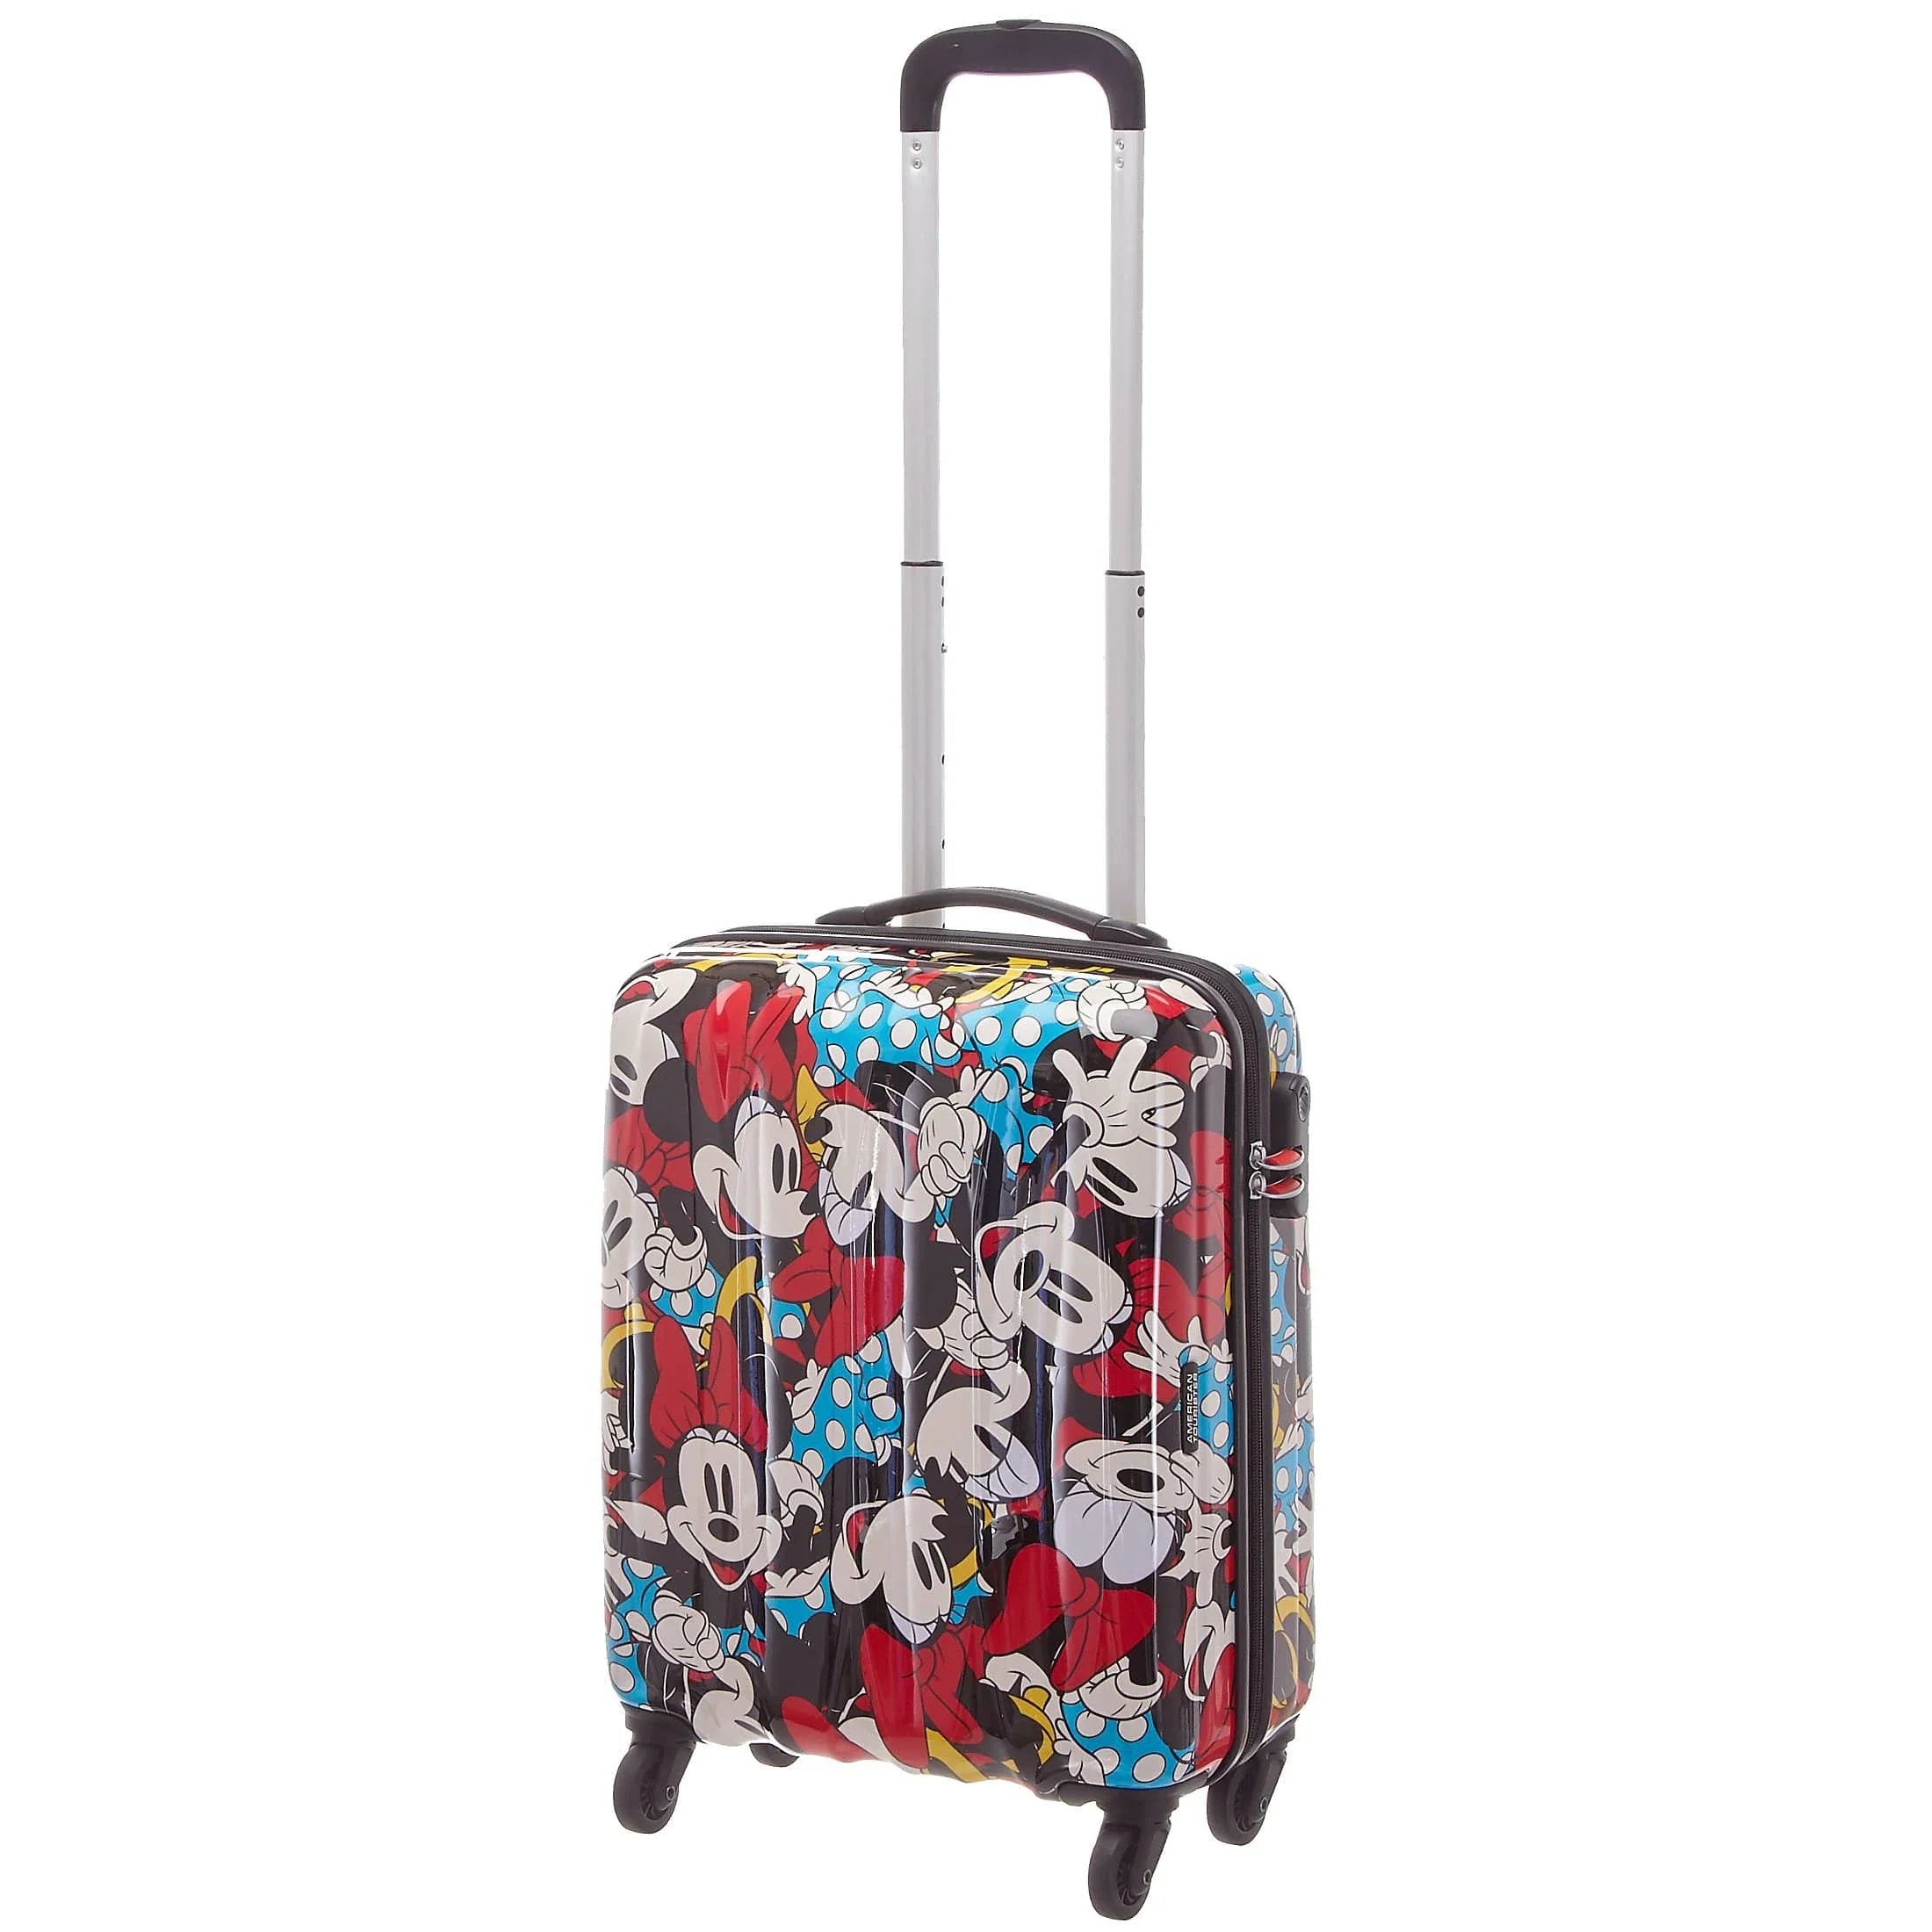 American Tourister Disney Legends Alfatwist 2.0 trolley cabine 4 roues 55 cm - Mickey Mouse à pois